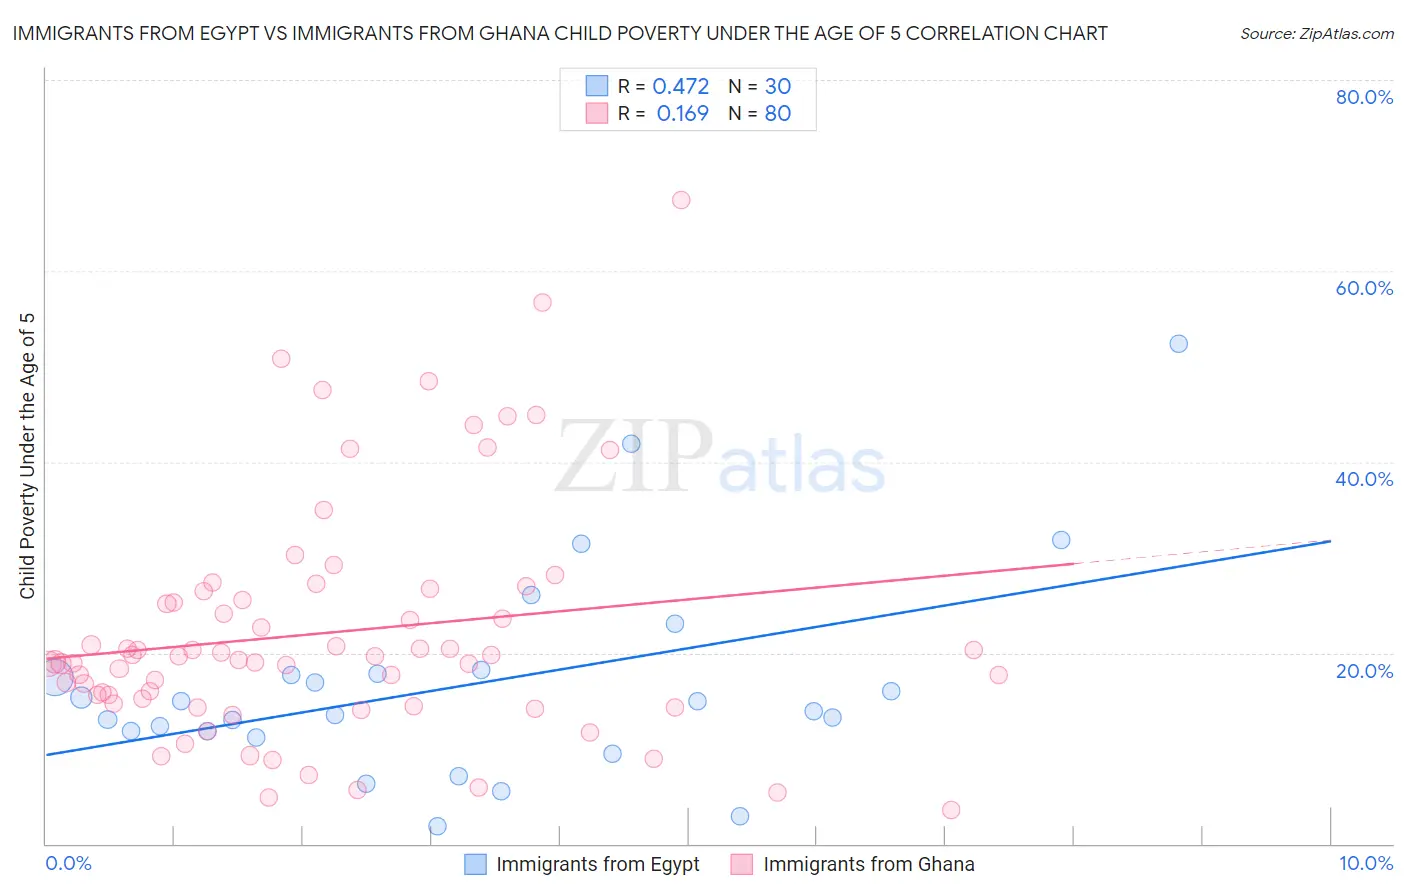 Immigrants from Egypt vs Immigrants from Ghana Child Poverty Under the Age of 5